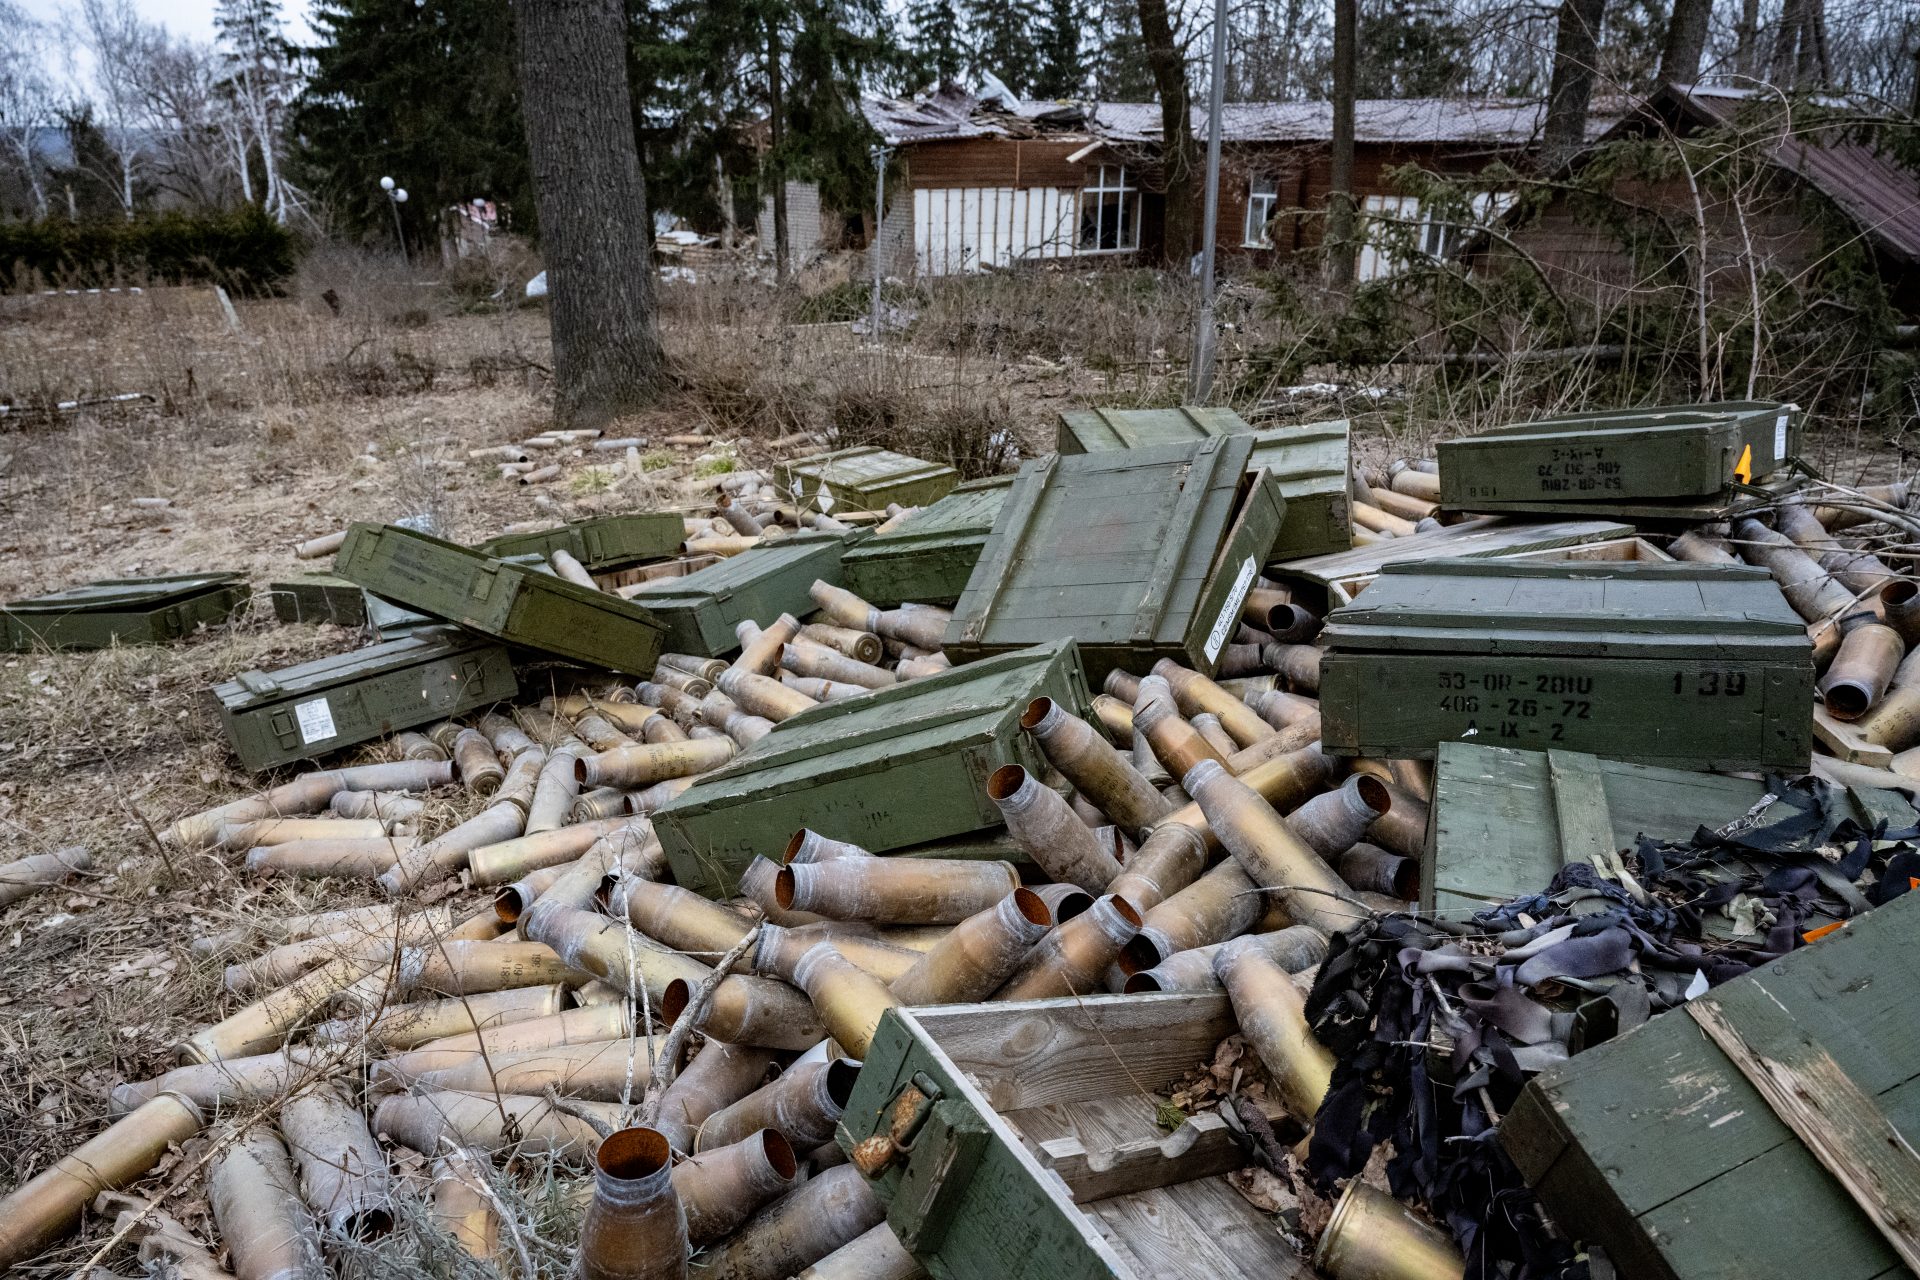 Ukraine’s shell shortage is a major issue